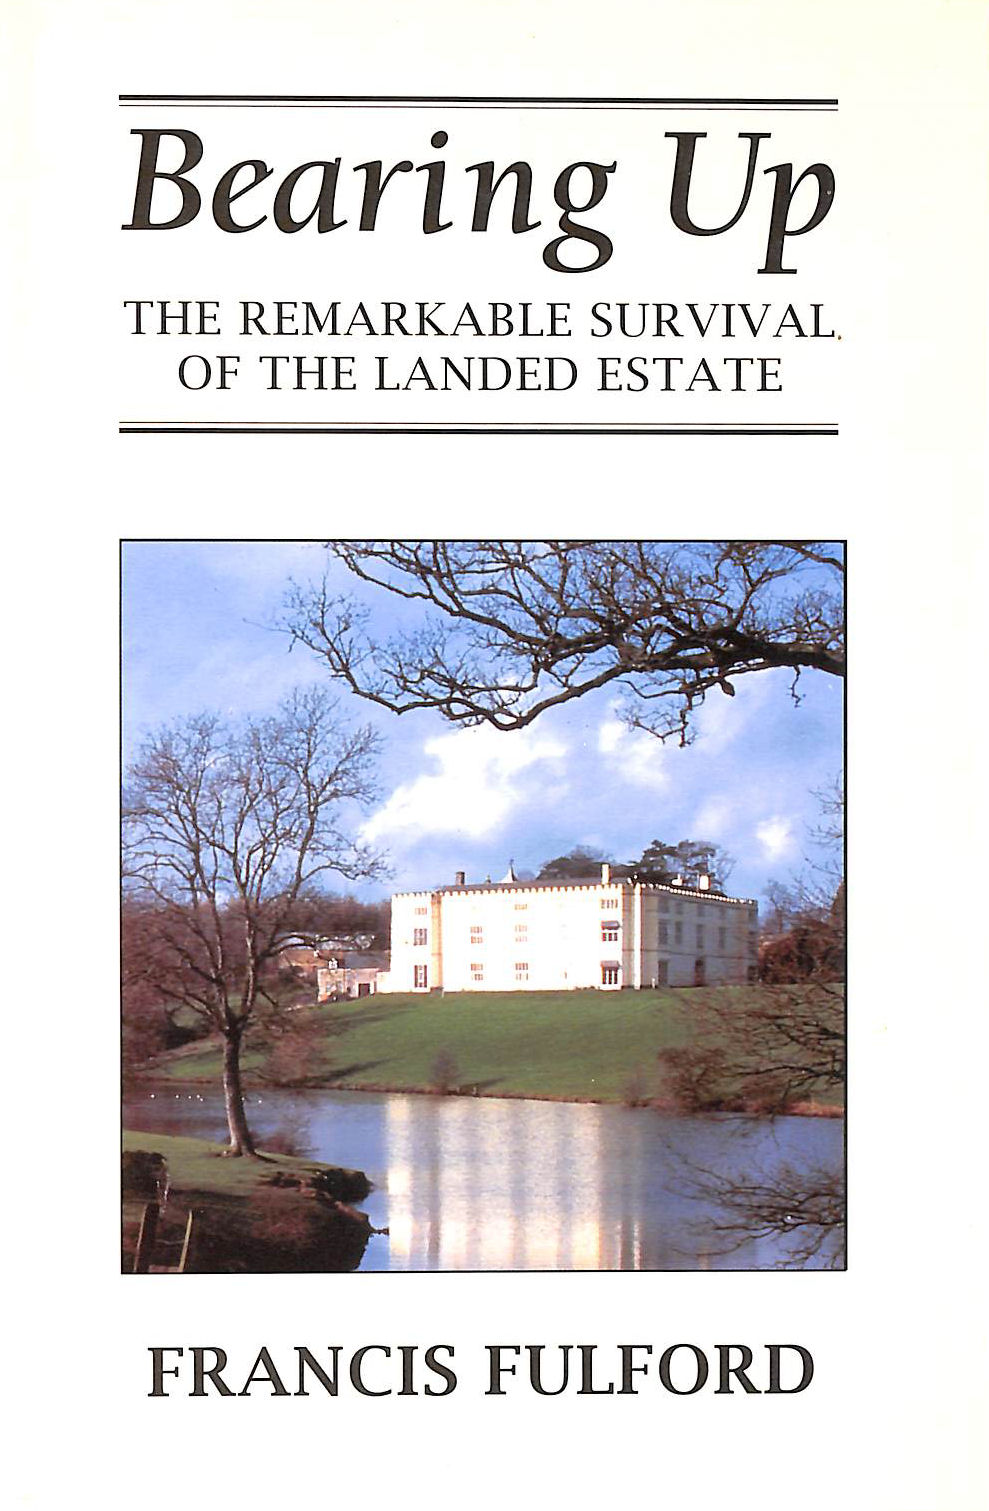 FULFORD, FRANCIS - Bearing Up: The Remarkable Survival of the Landed Estate